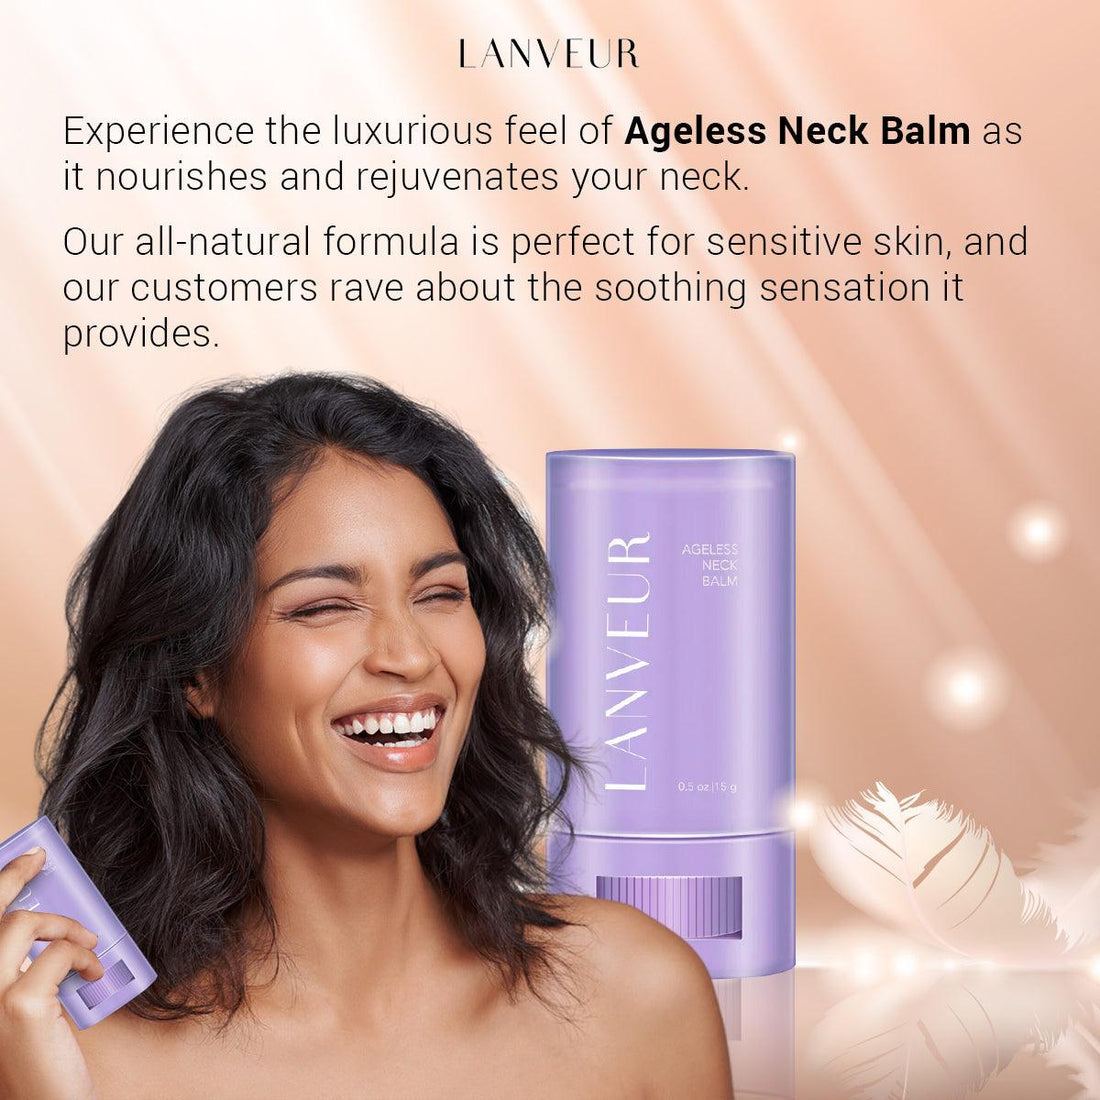 Say Goodbye to Neck Wrinkles: Why Women Over 50 Should Use Lanveur Ageless Neck Balm Instead of Facial Creams - LanveurBotanica